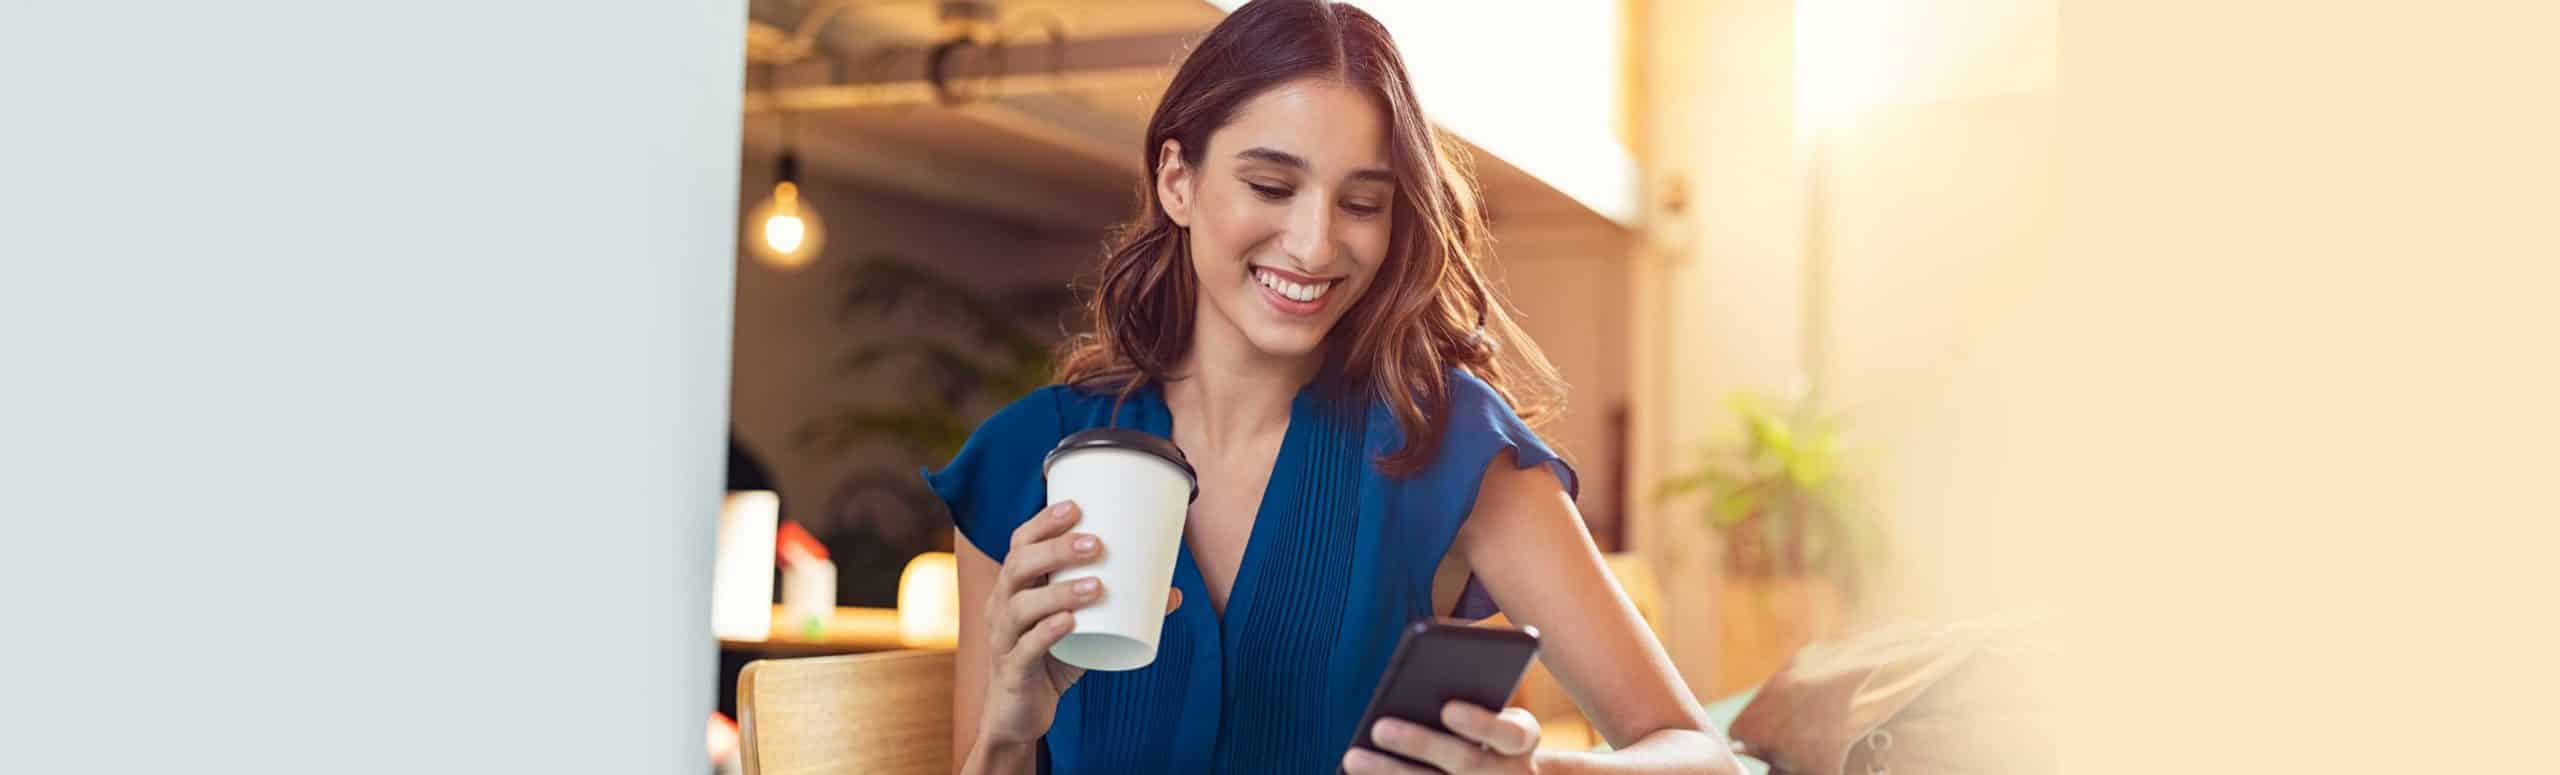 Woman holding a coffee cup smiling at her smartphone